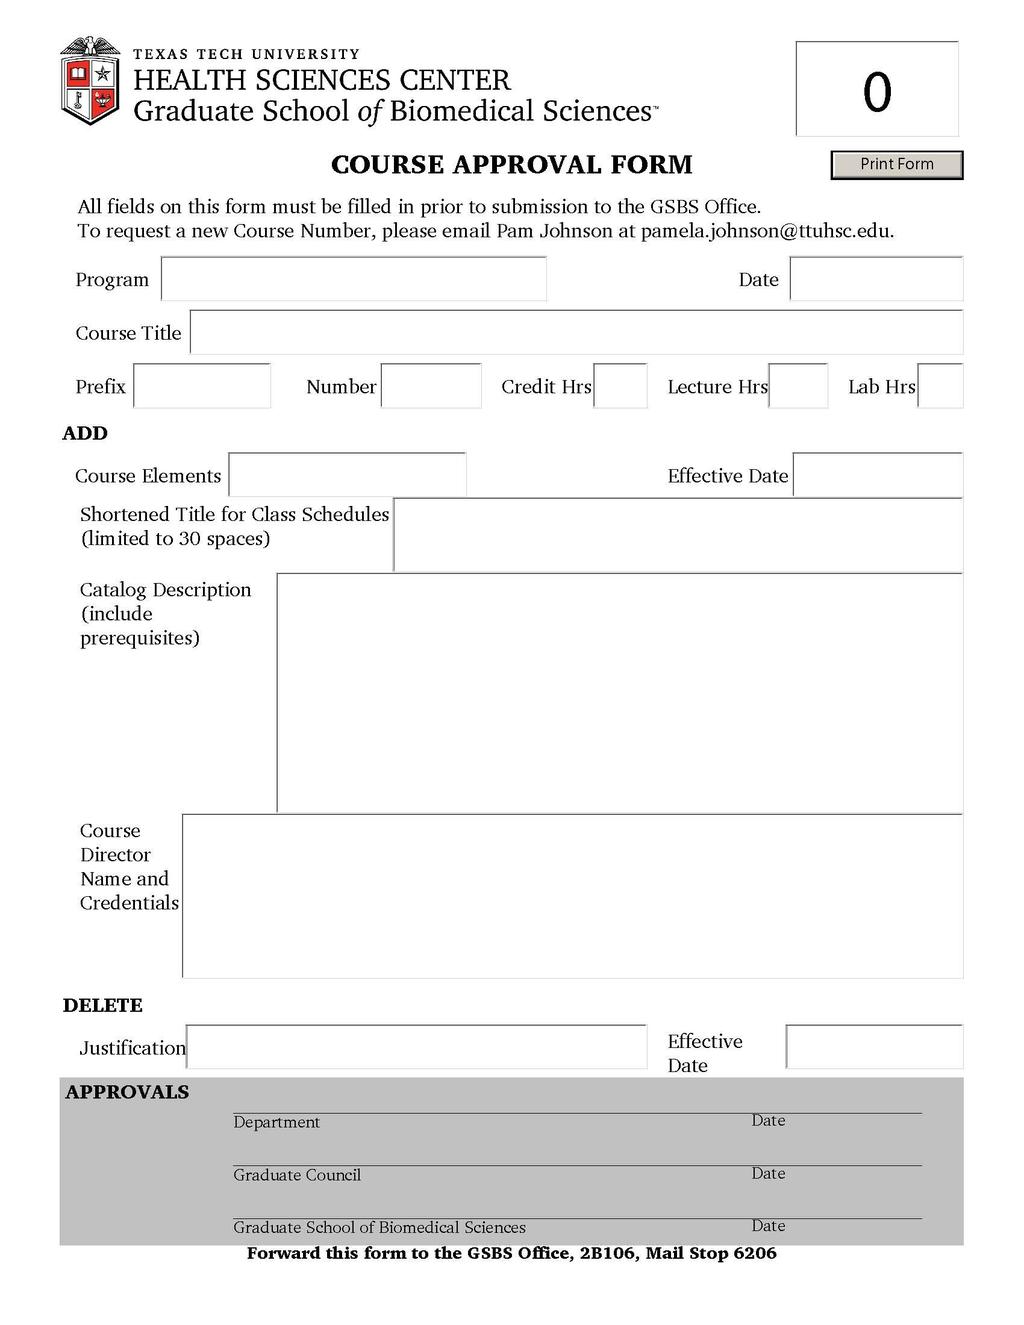 COURSE APPROVAL FORM (MUST BE COMPLETED ON-LINE AT: http://www.ttuhsc.